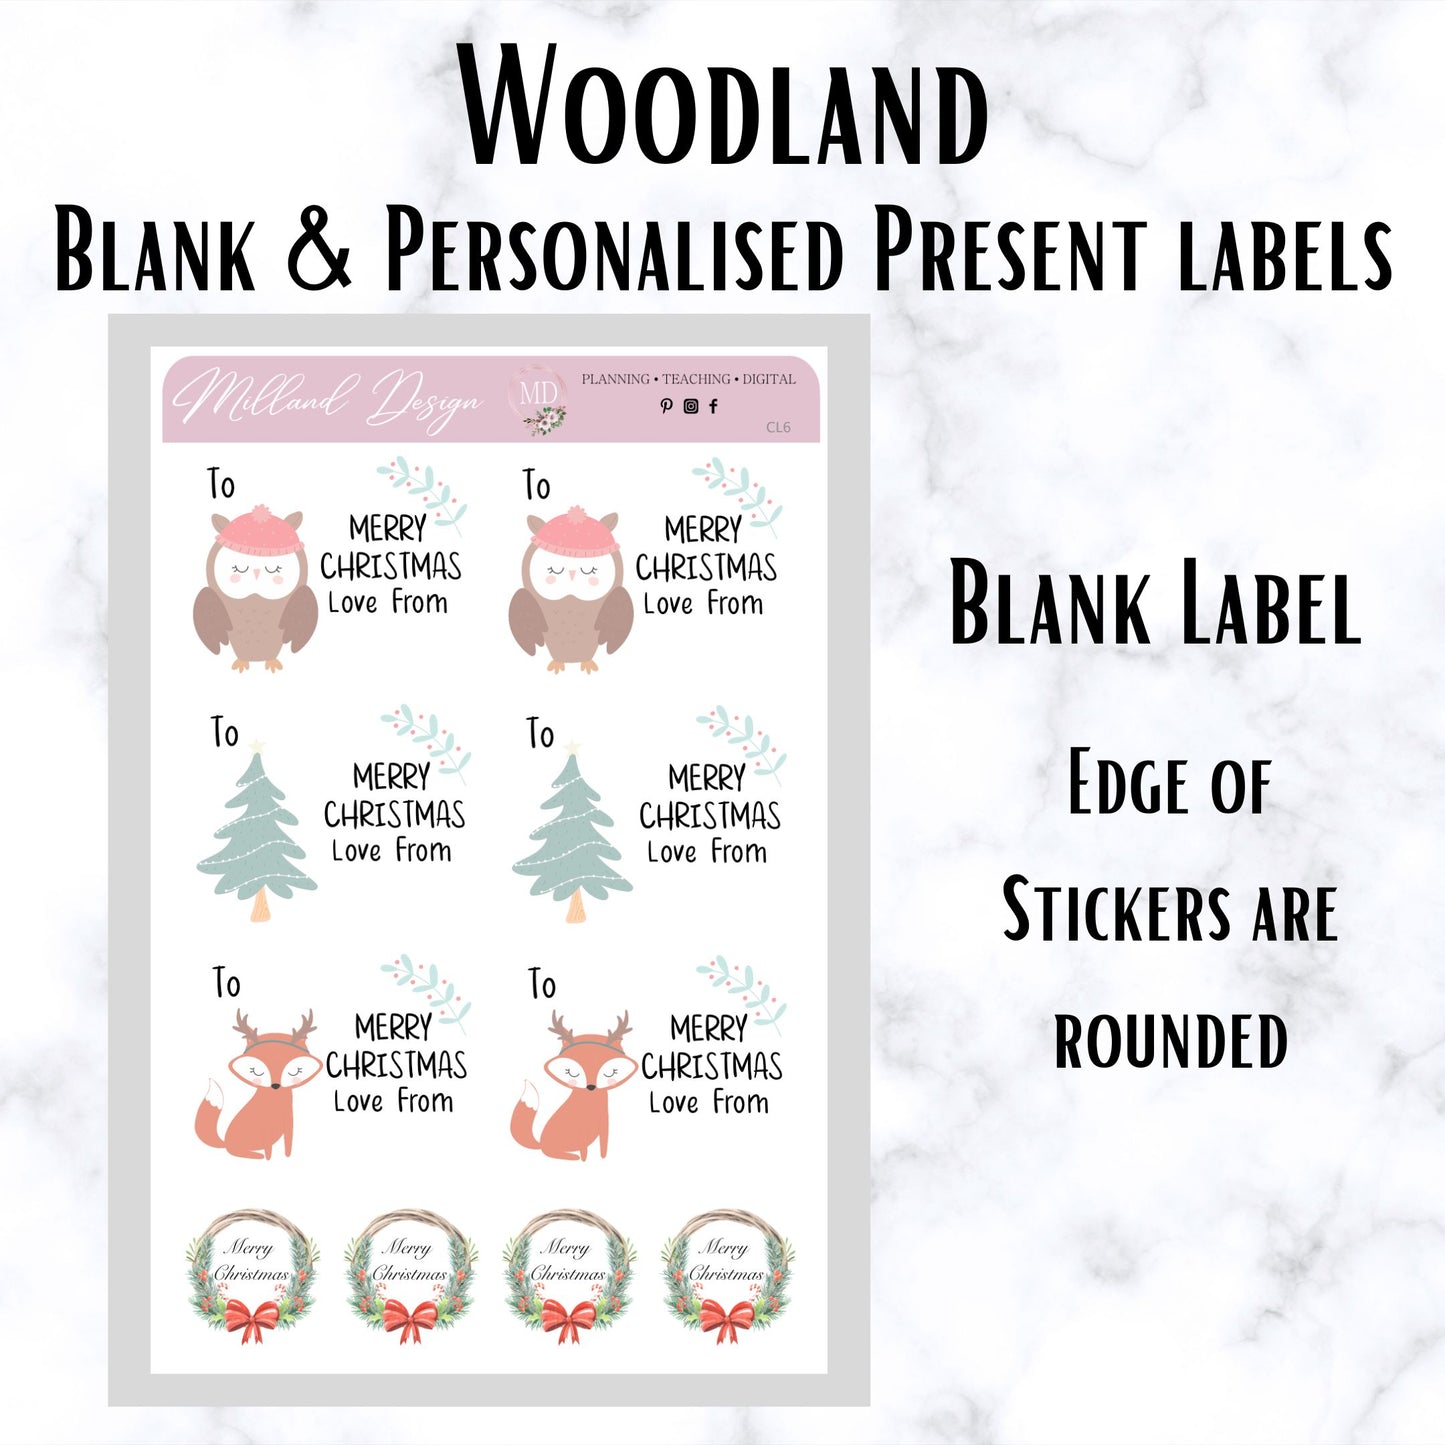 Woodland Blank & Personalised Christmas Present Labels